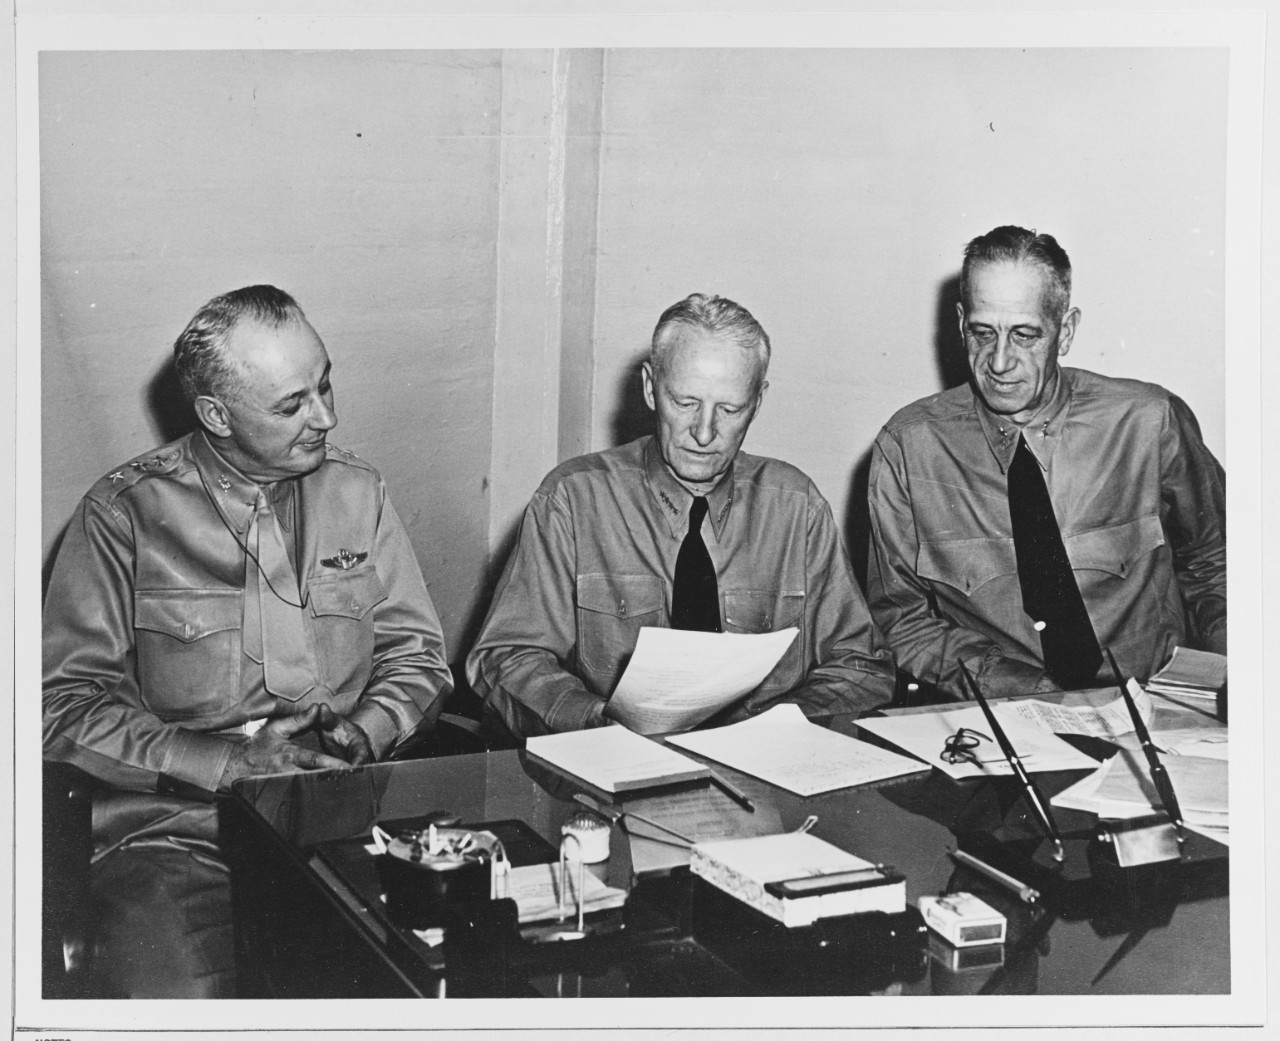 Admiral Chester W. Nimitz, USN, CINCPAC is shown with two of his staff officers